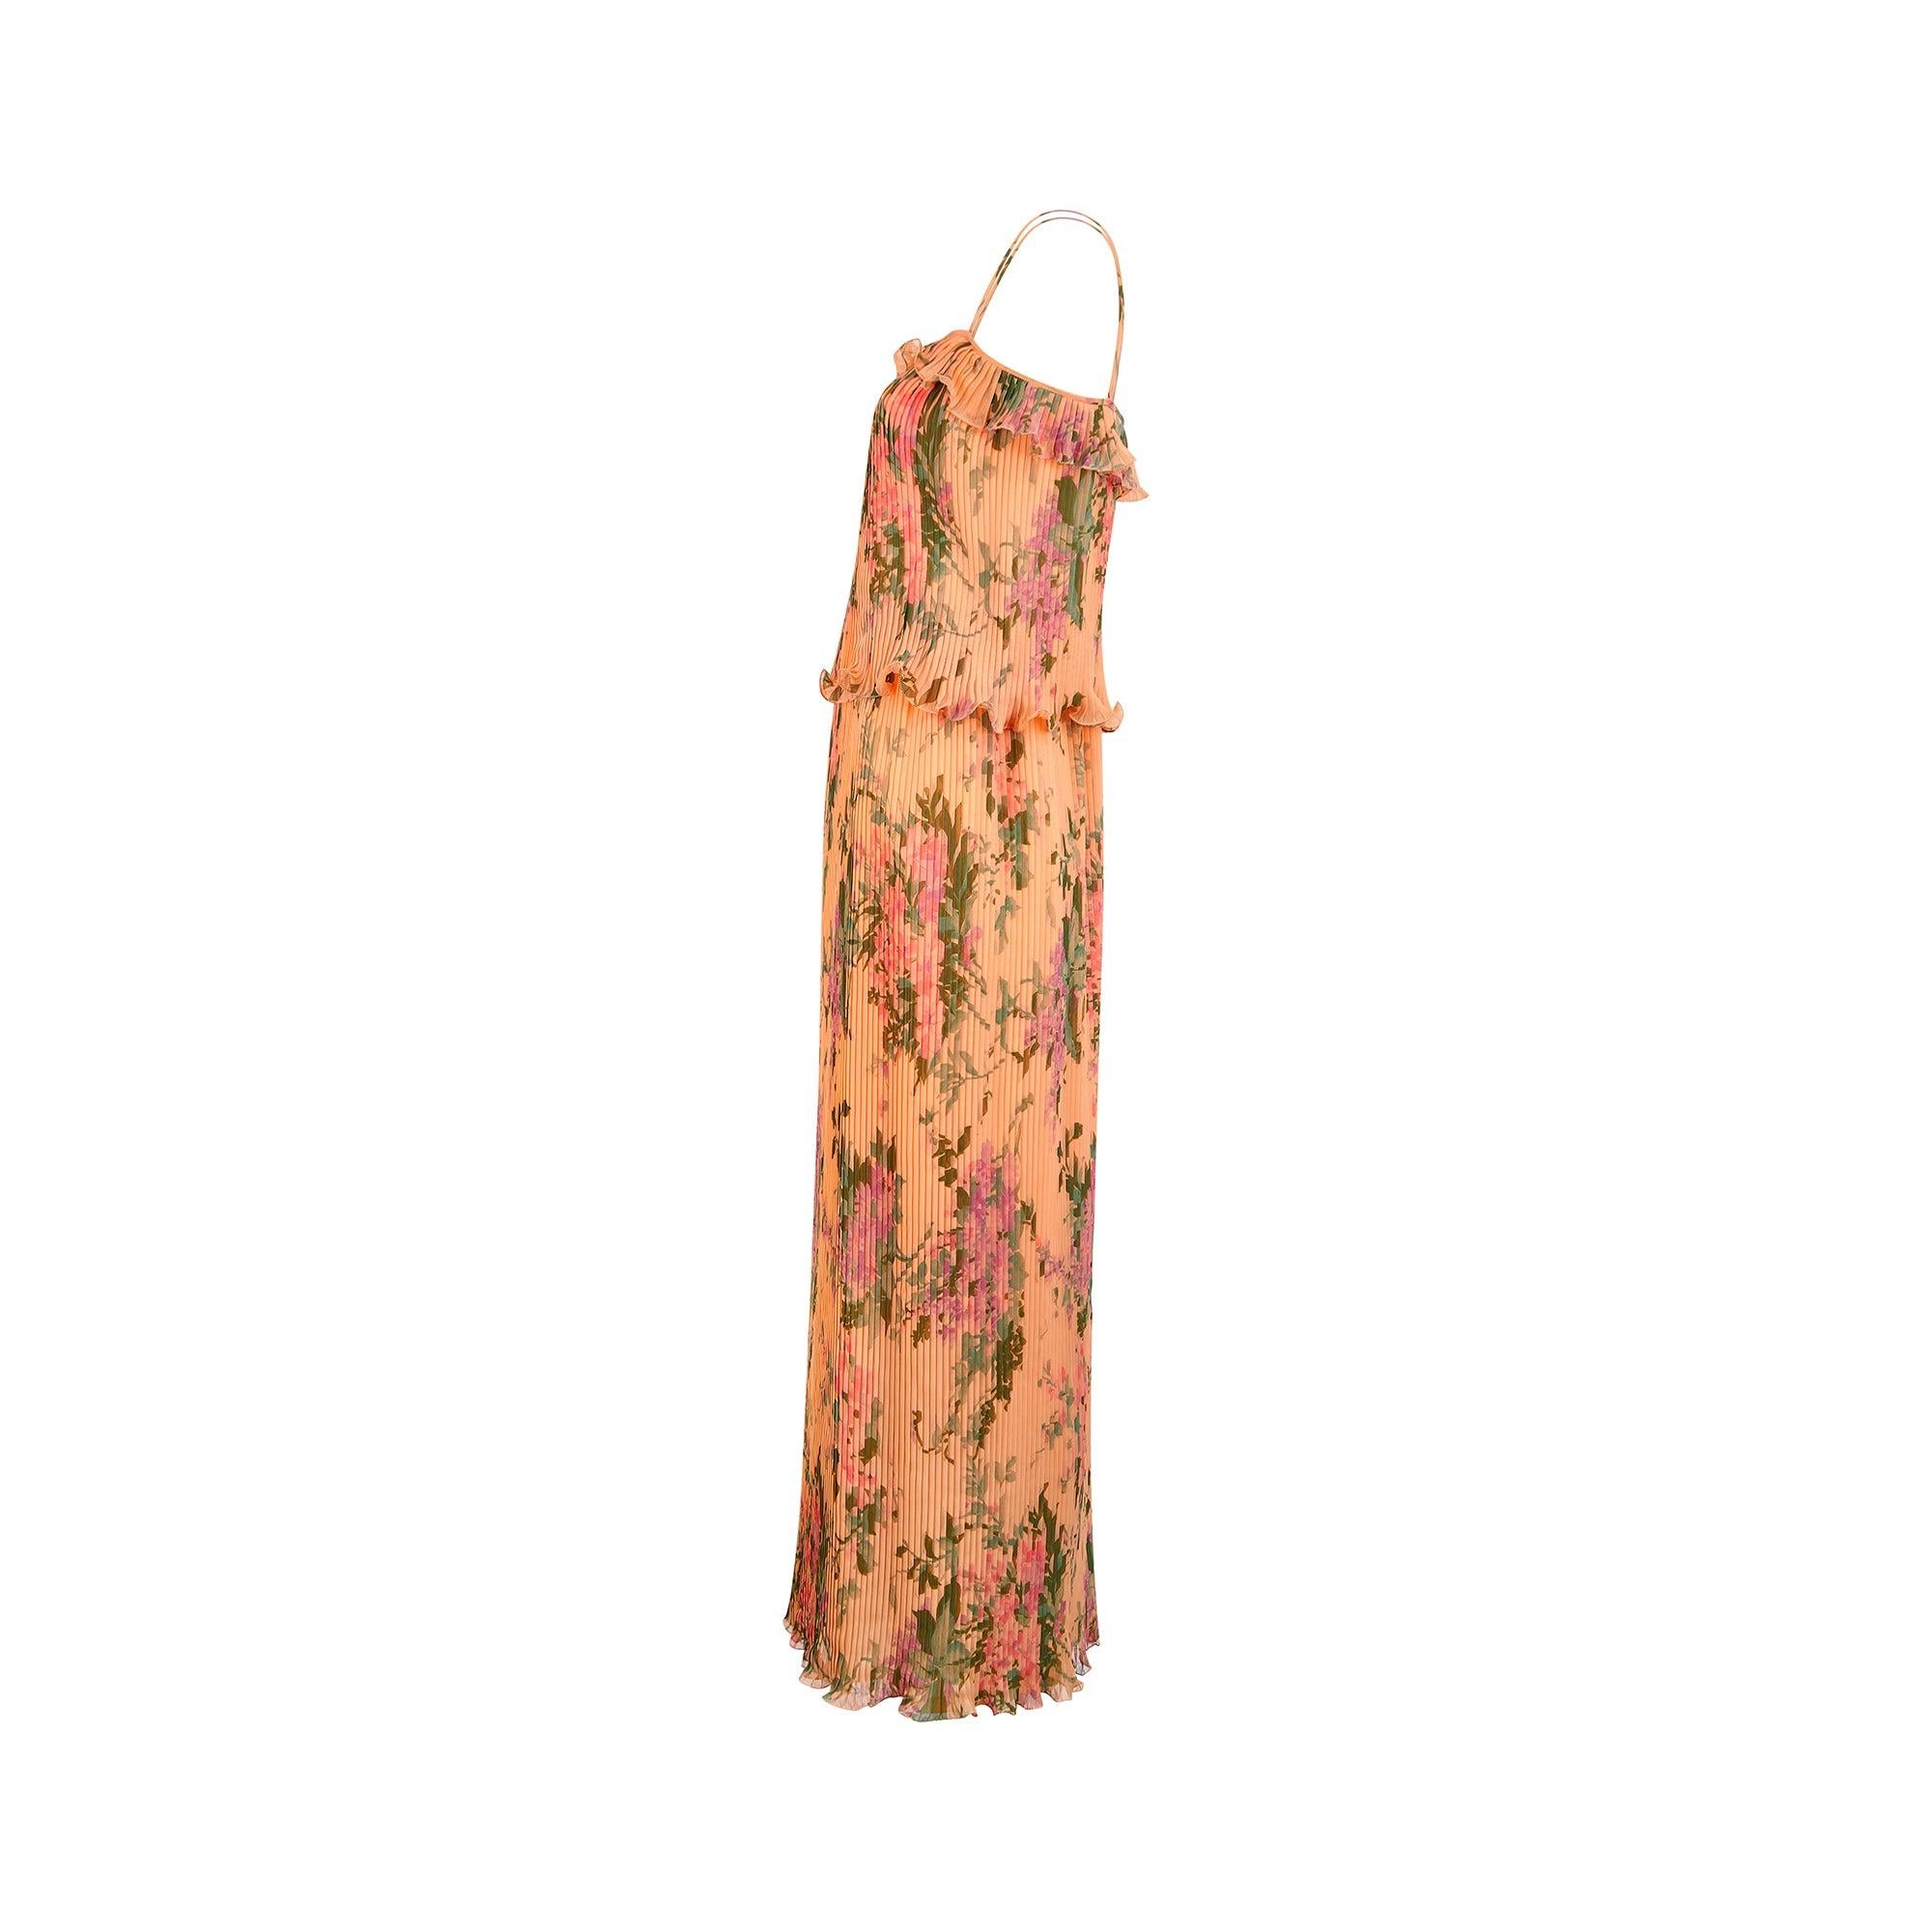 This 1970s maxi dress was bought in Paris and is crafted from man-made peach chiffon splashed with bold lilac and pink florals. Pleated all over with an innovative technique that ensures the folds remain when wet or washed, it has a playful ruffle